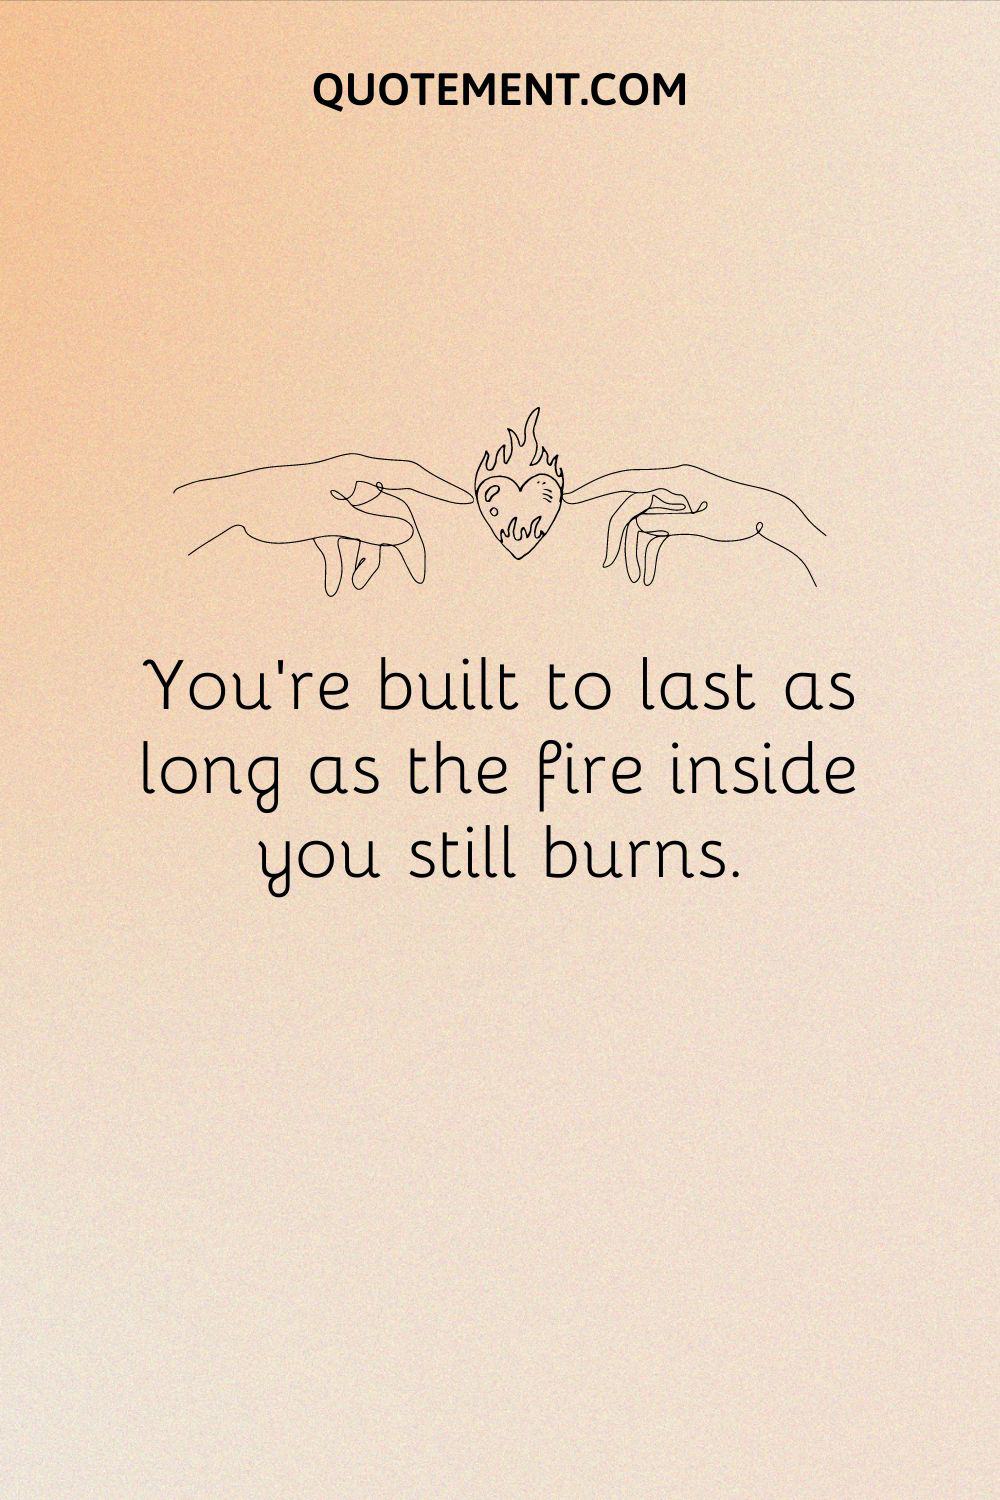 You’re built to last as long as the fire inside you still burns